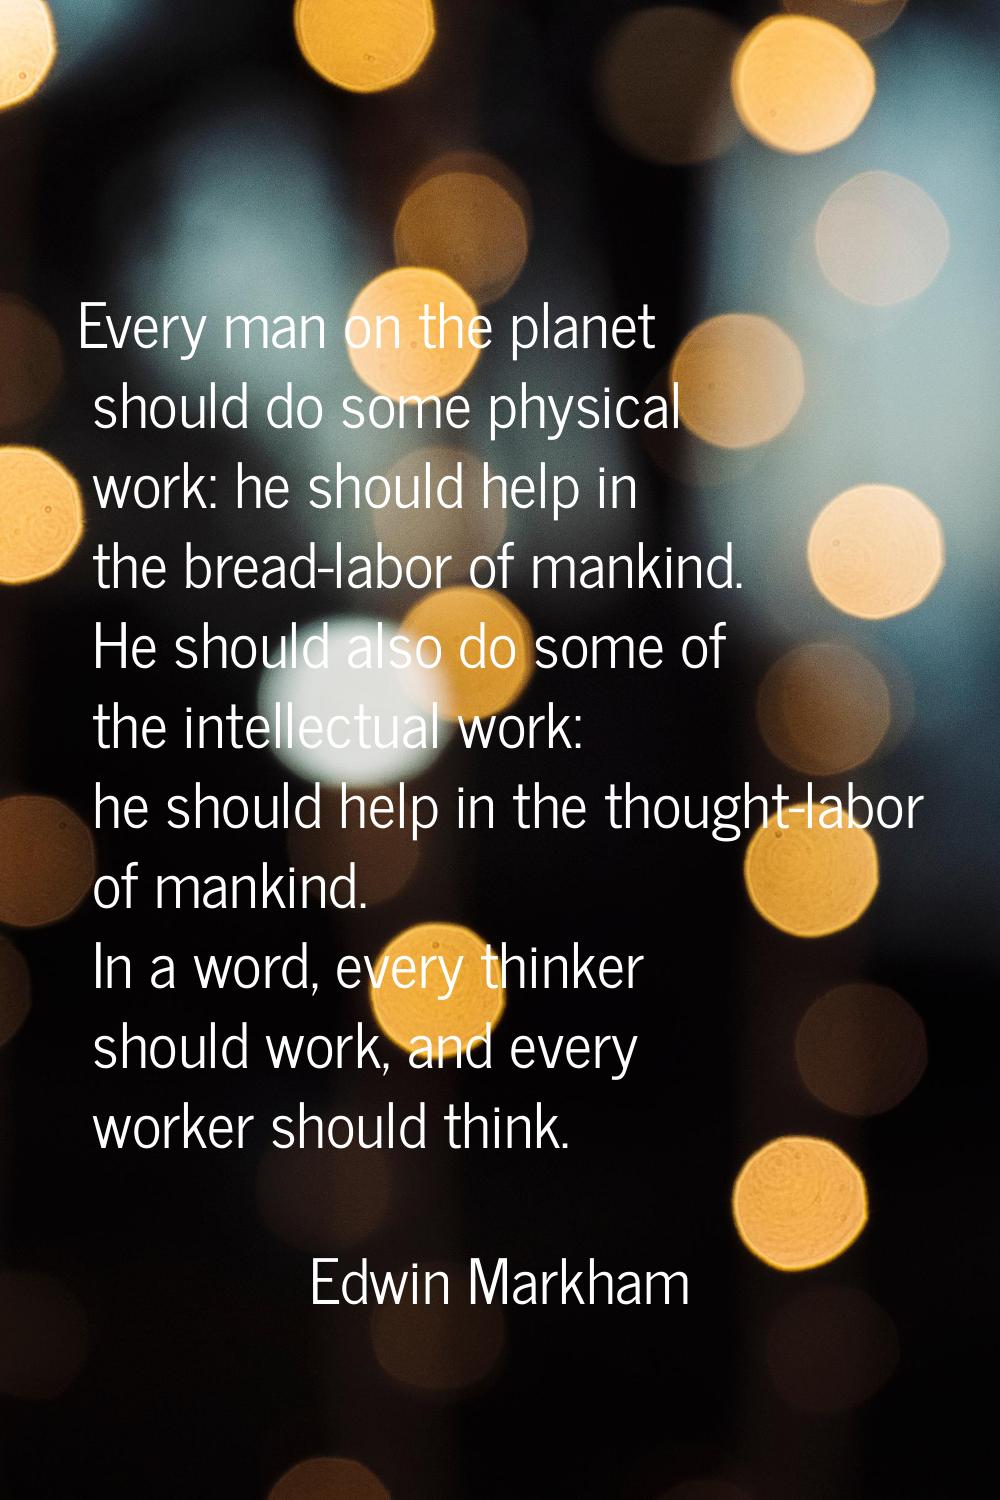 Every man on the planet should do some physical work: he should help in the bread-labor of mankind.